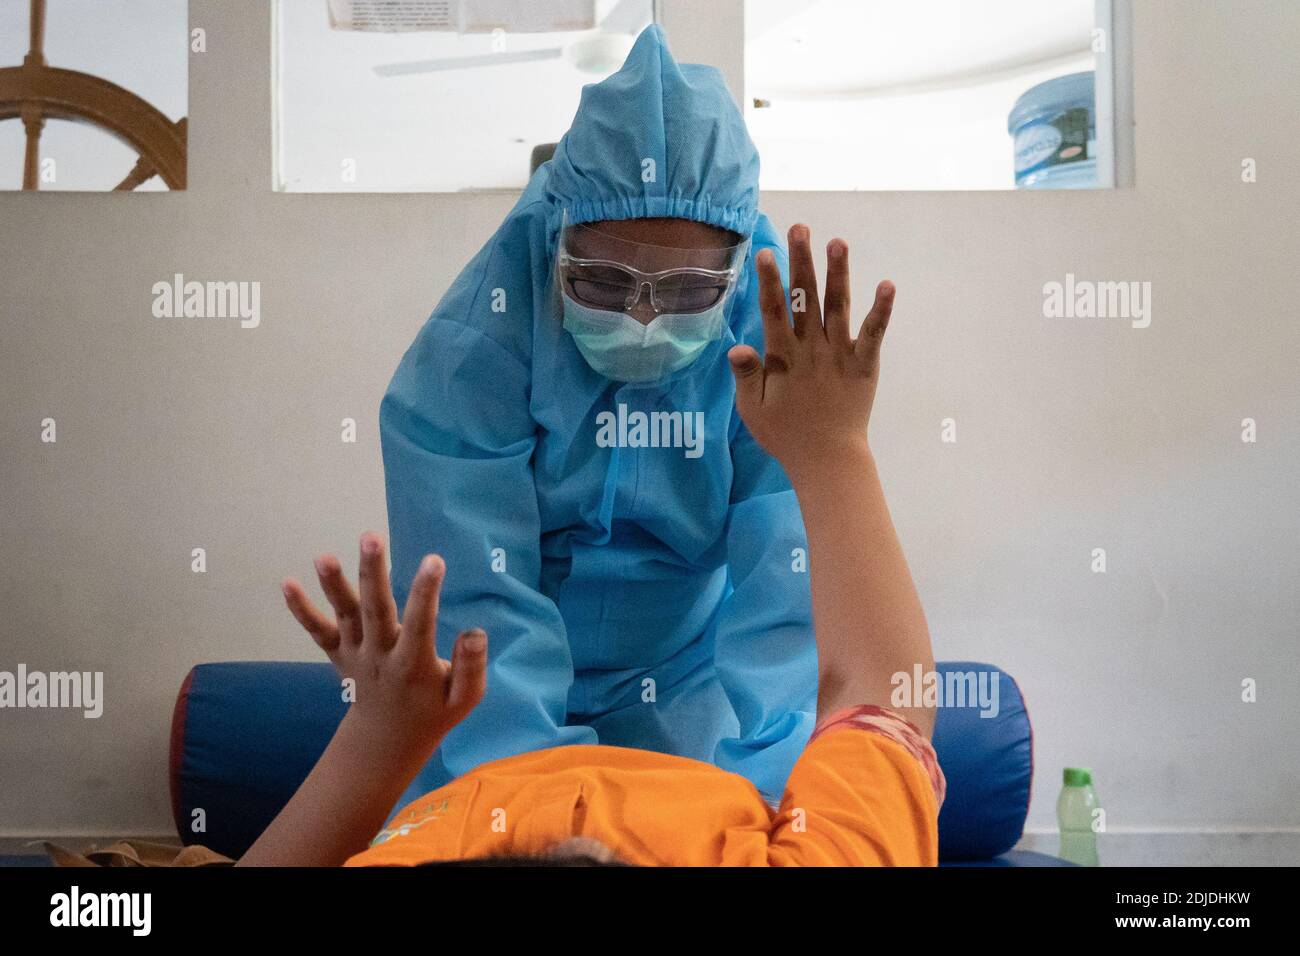 BALI/INDONESIA-OCT 23 2020: a child with a physical disability is doing physical therapy. They wear masks and hamzat suit to avoid the spread of the C Stock Photo